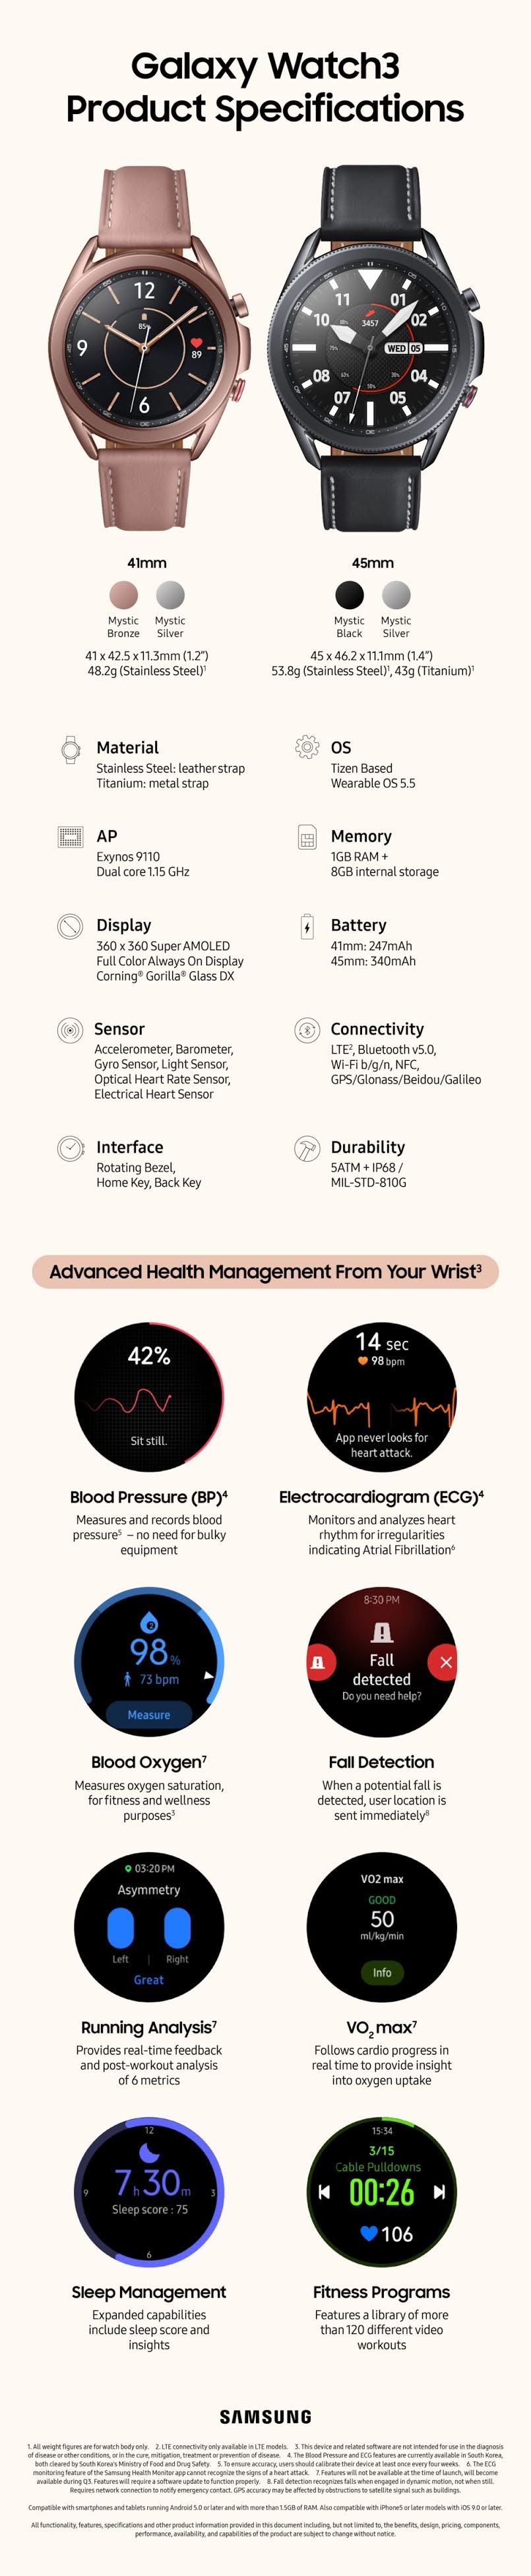 An Up-Close Look at the Galaxy Watch3 #infographic #Communication #Galaxy #Informative Personal Watch #Watch  #Galaxy Watch3